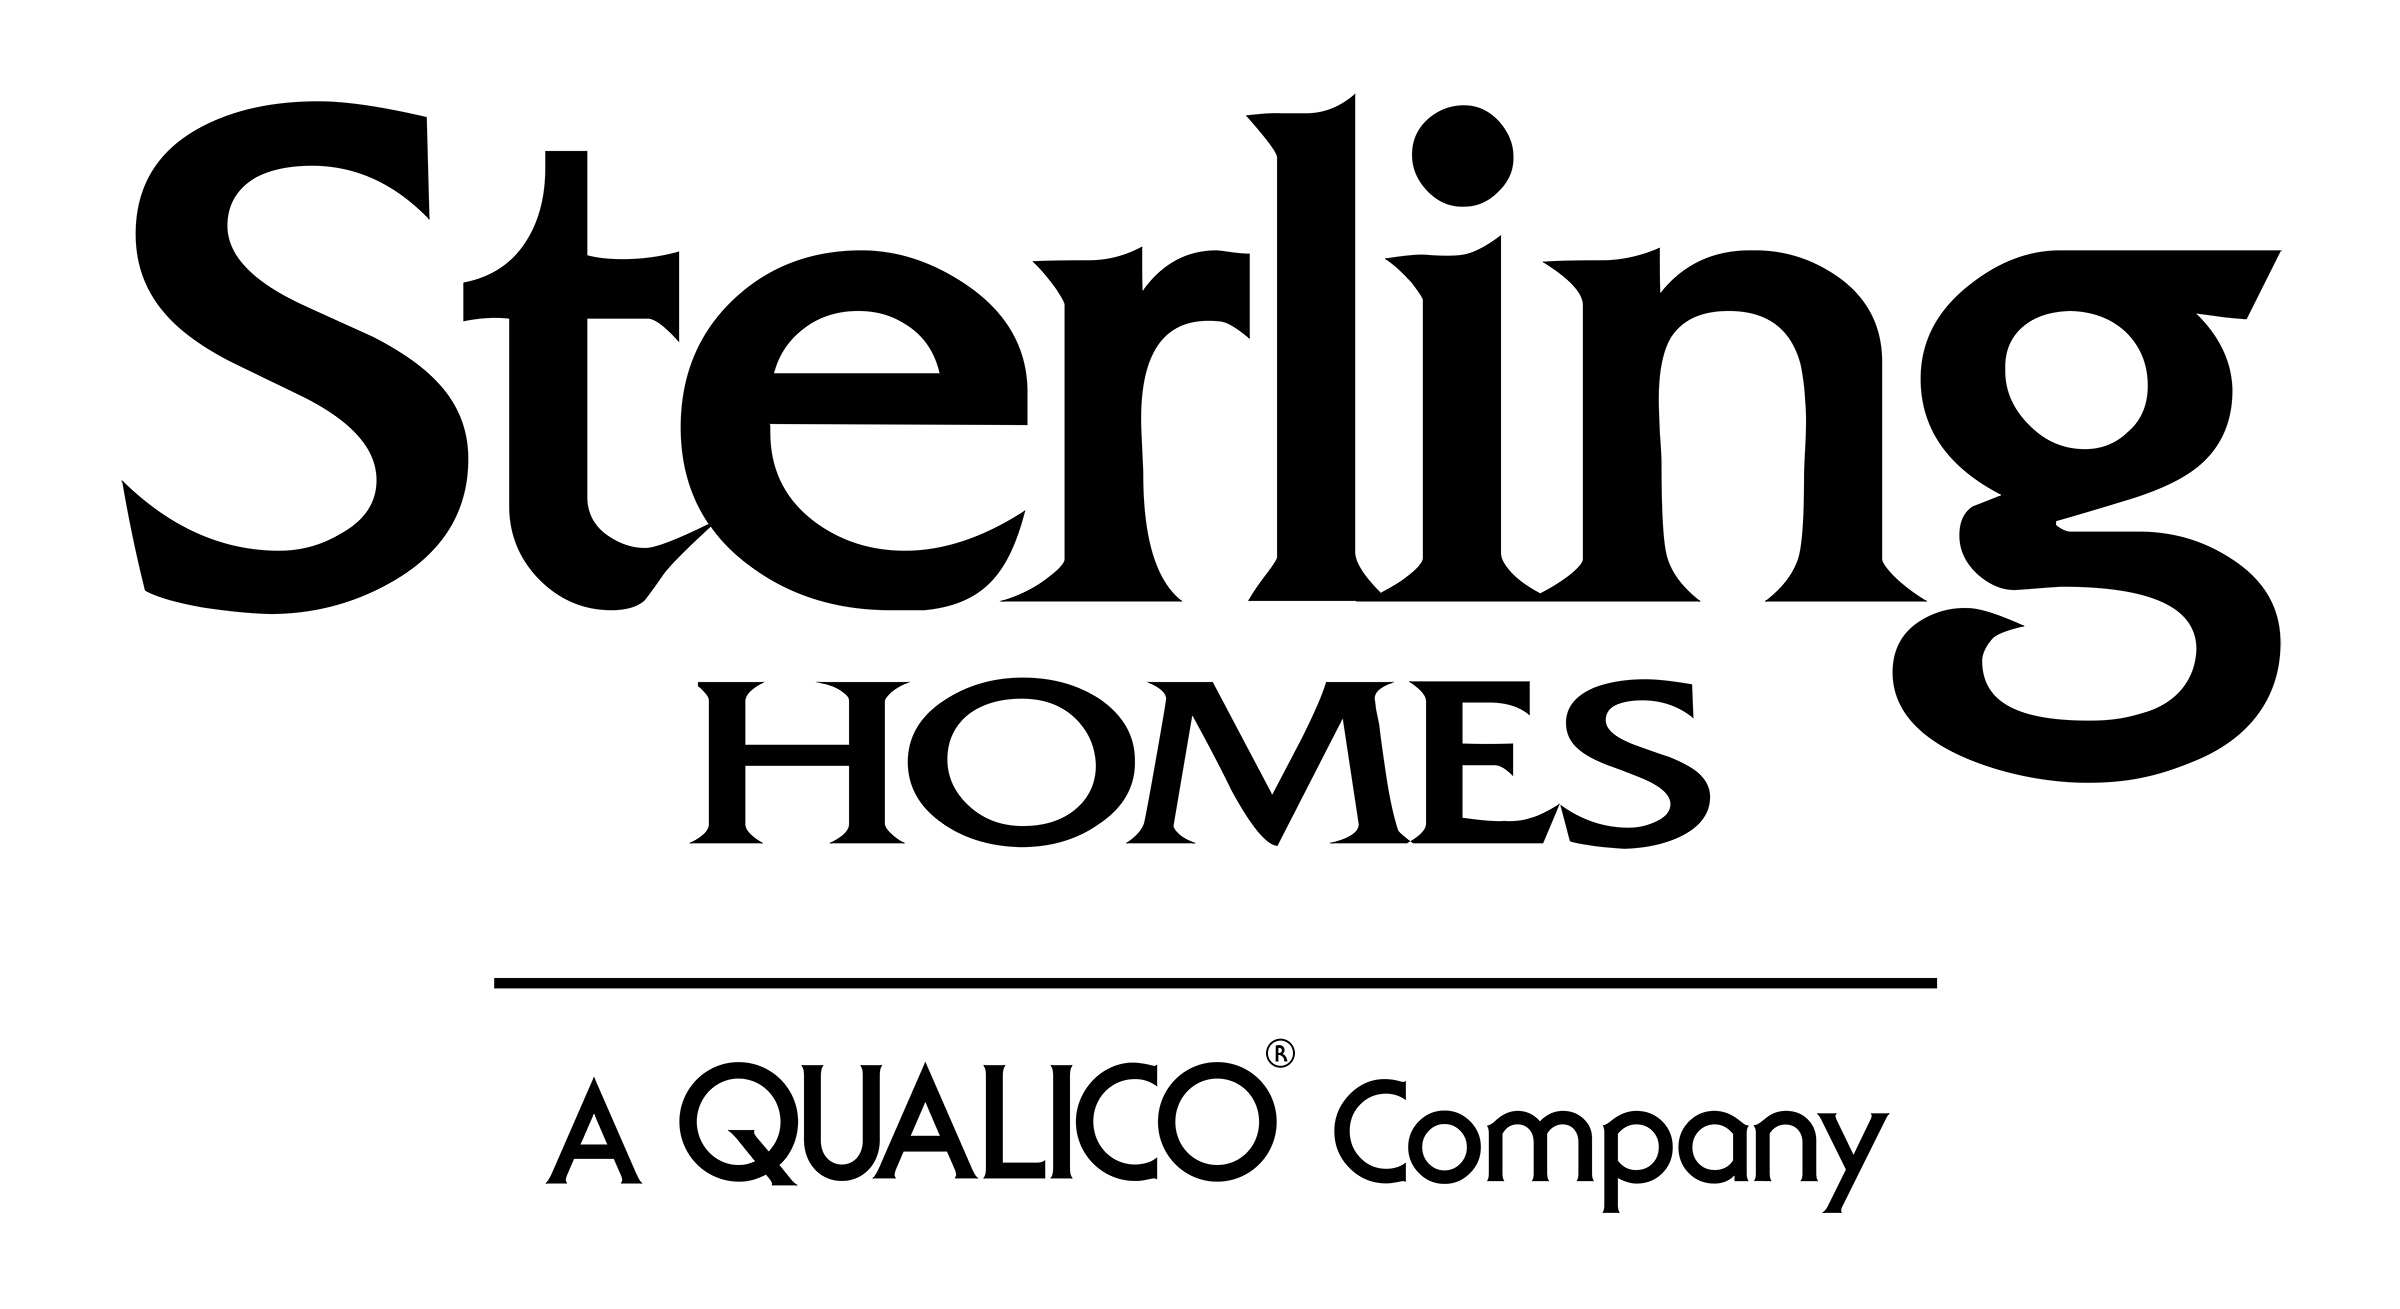 Sterling Homes